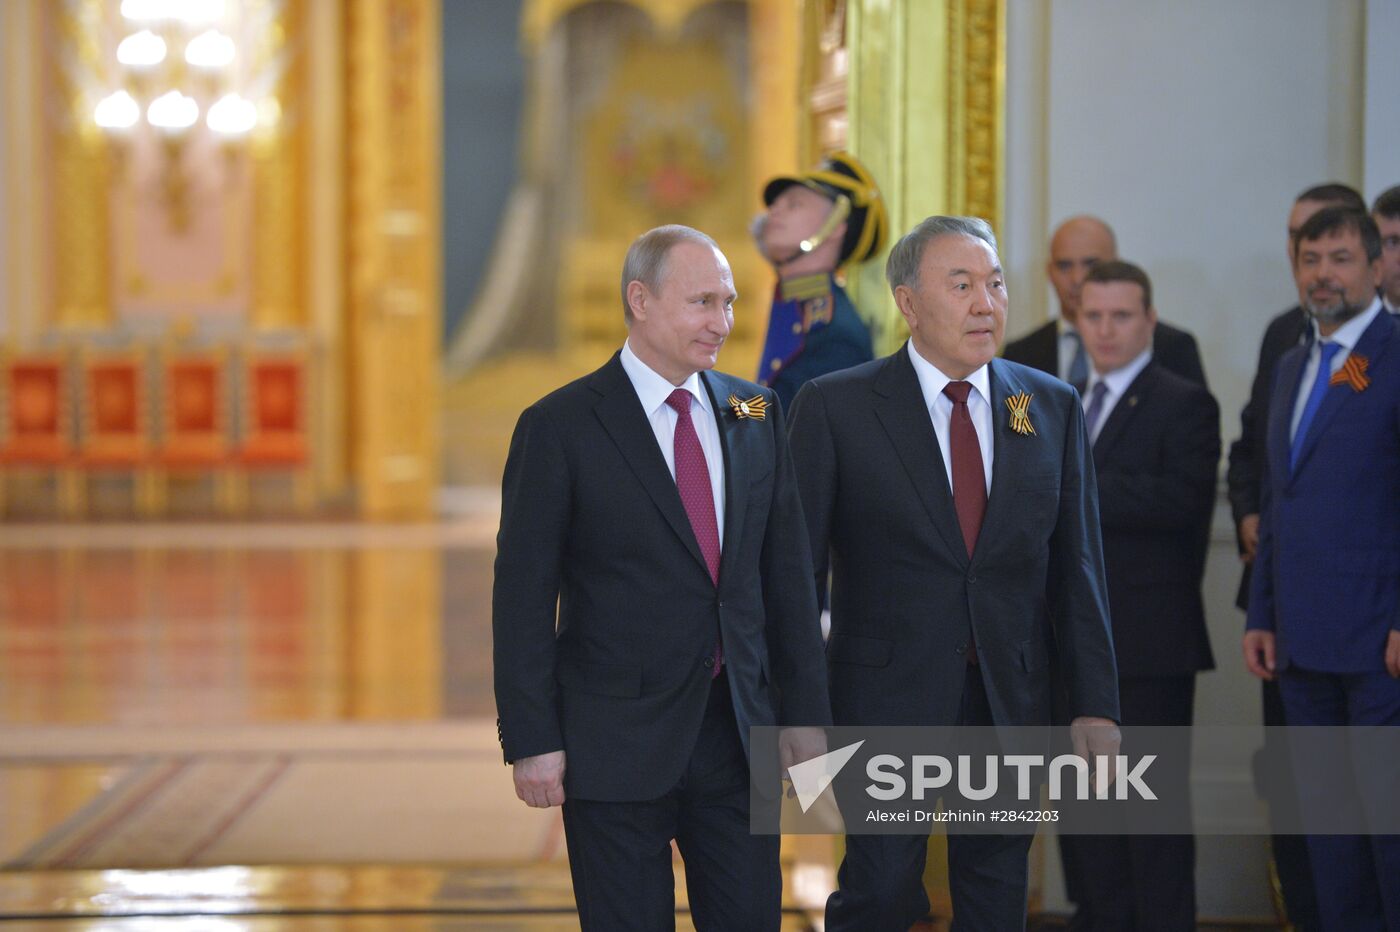 Reception hosted by President Vladimir Putin to mark 71st anniversary of Victory in 1941-1945 Great Patriotic War